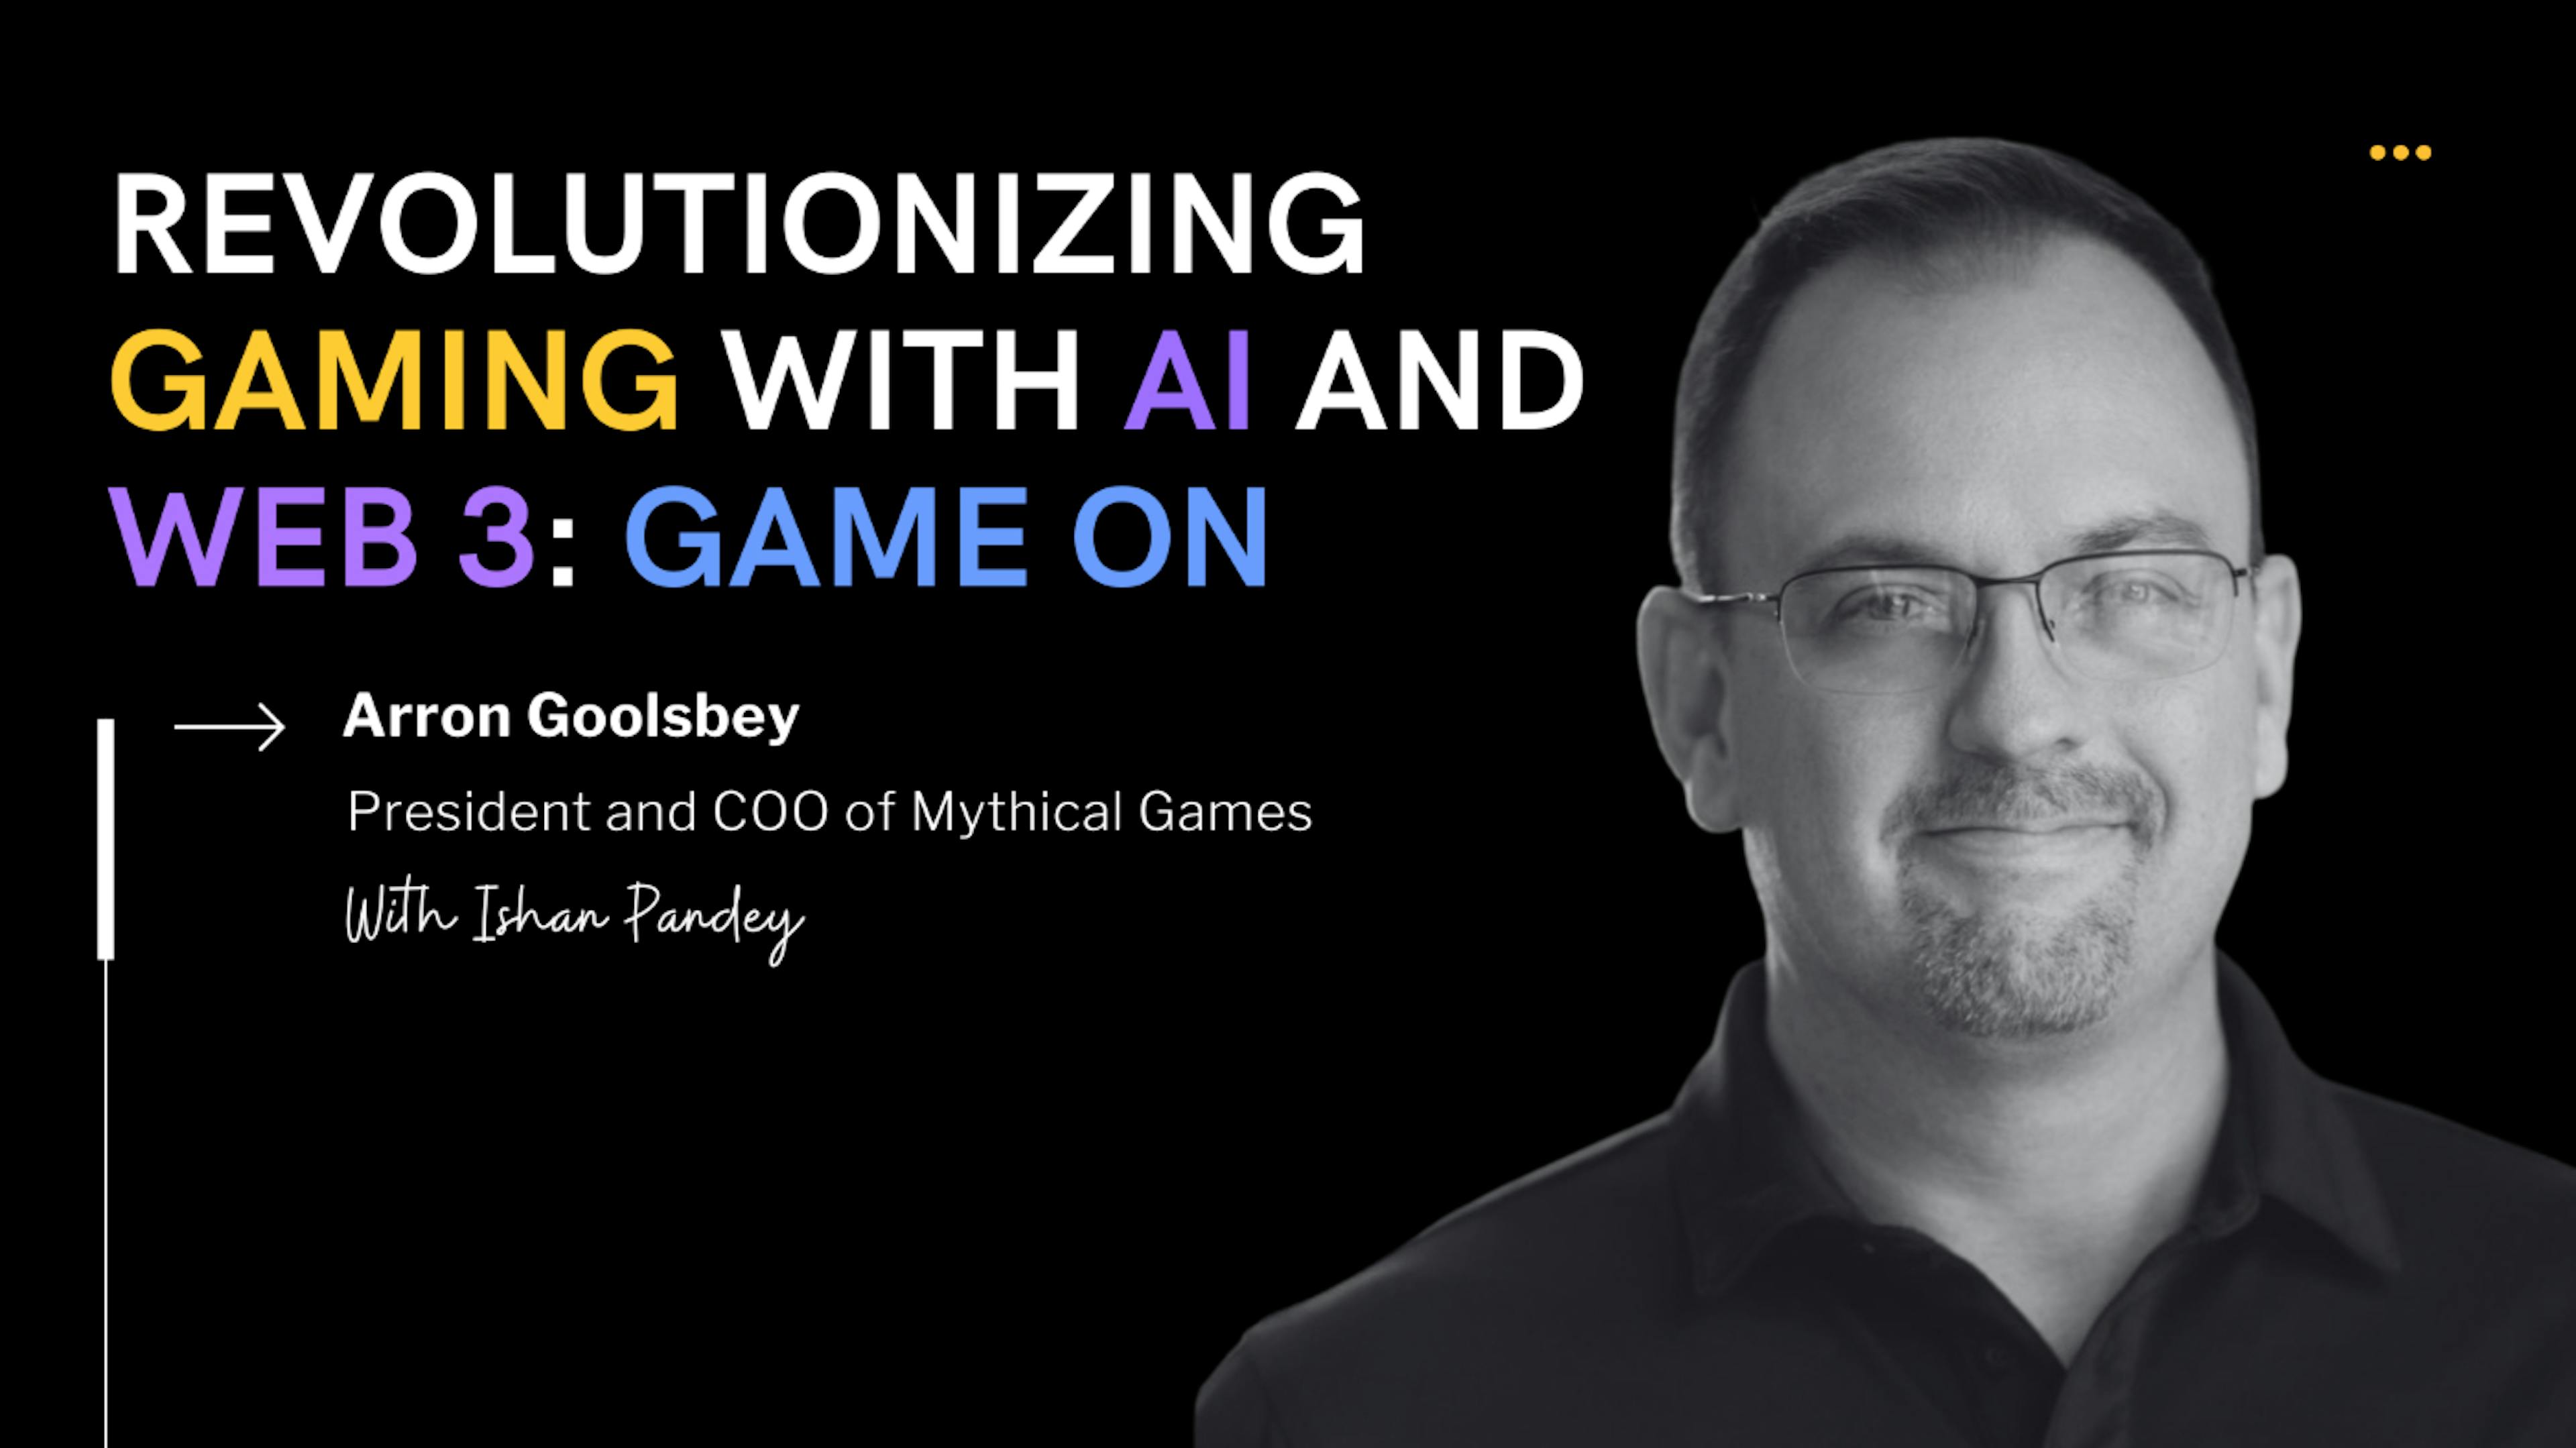 featured image - Arron Goolsbey Talks Future of Gaming with AI and Blockchain at Mythical Games